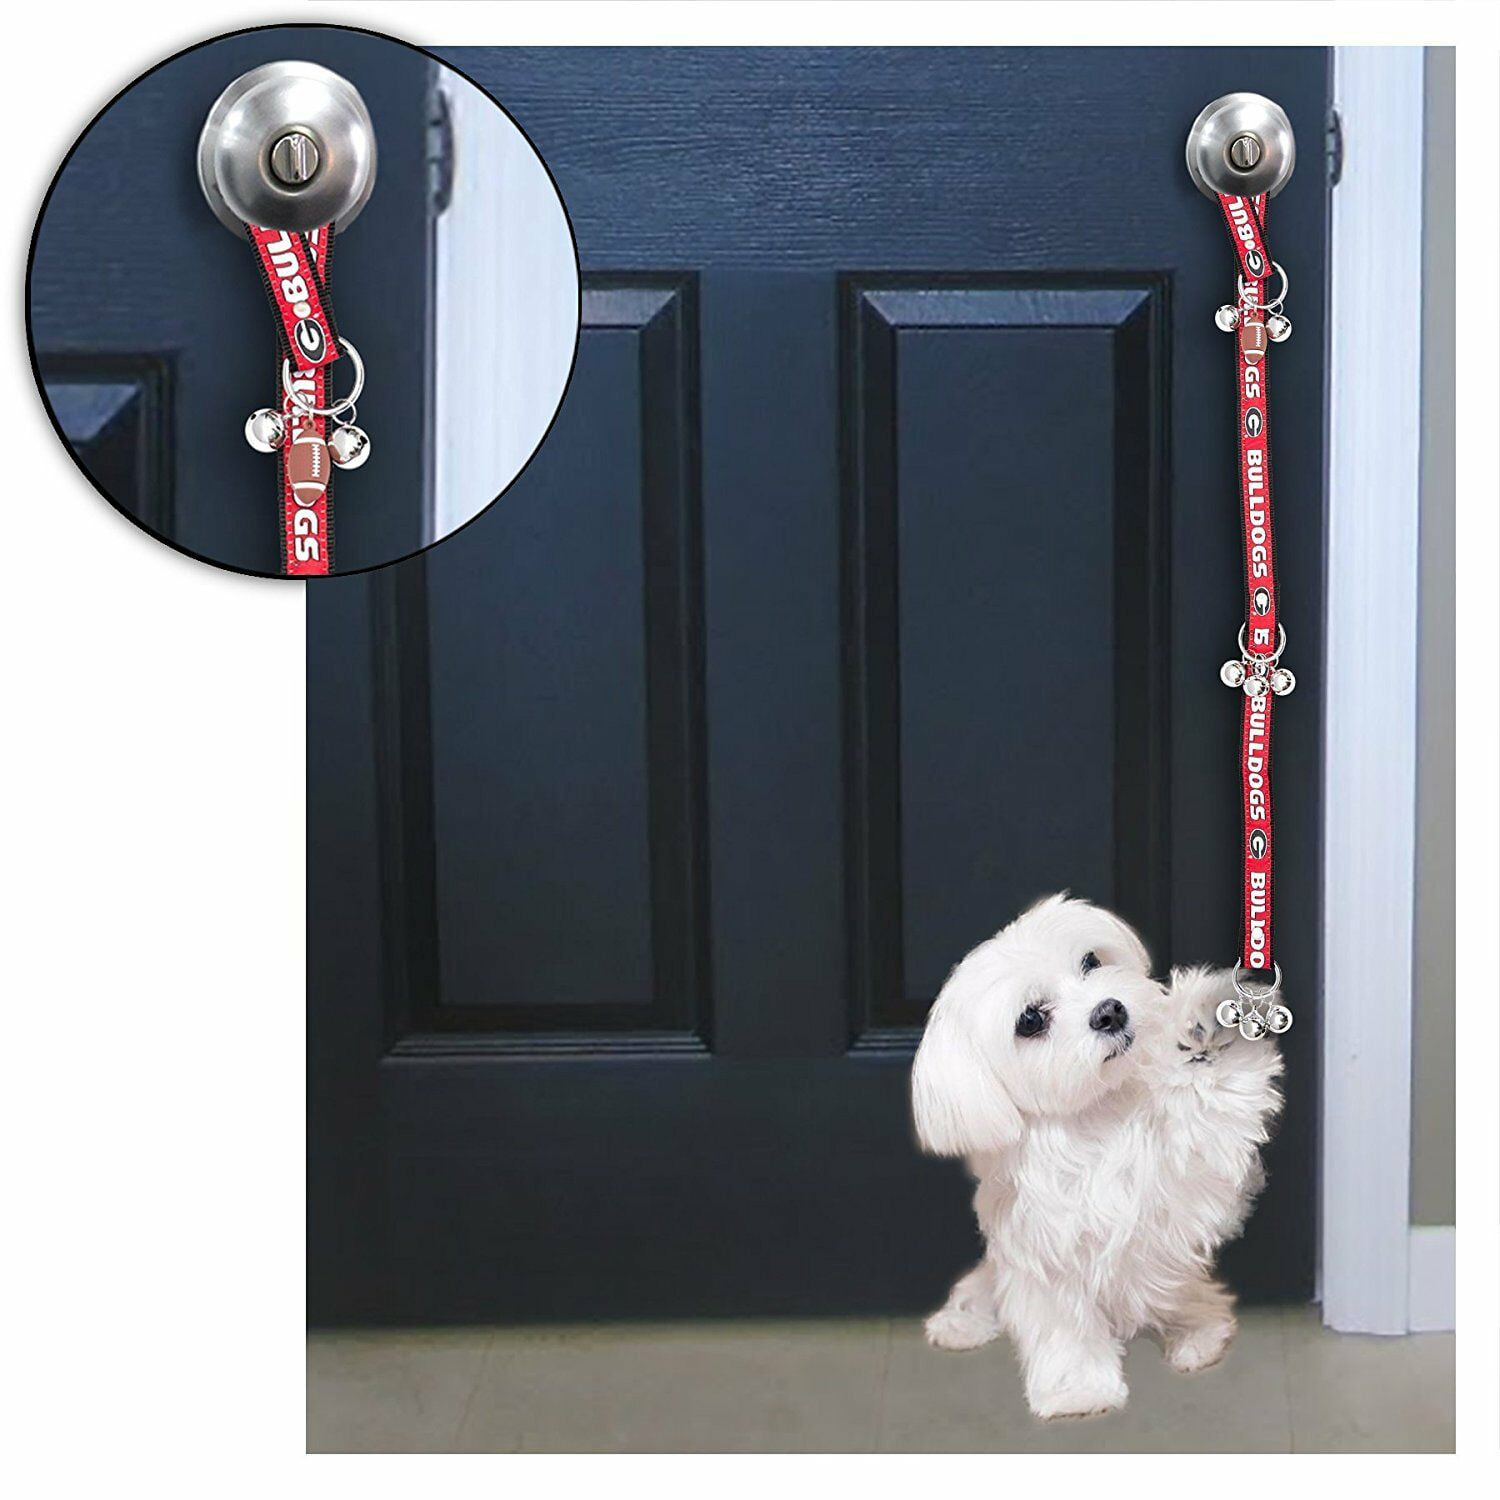 40 College teams Licensed Home Entry Decor! NCAA Door Training Bells for Pets 